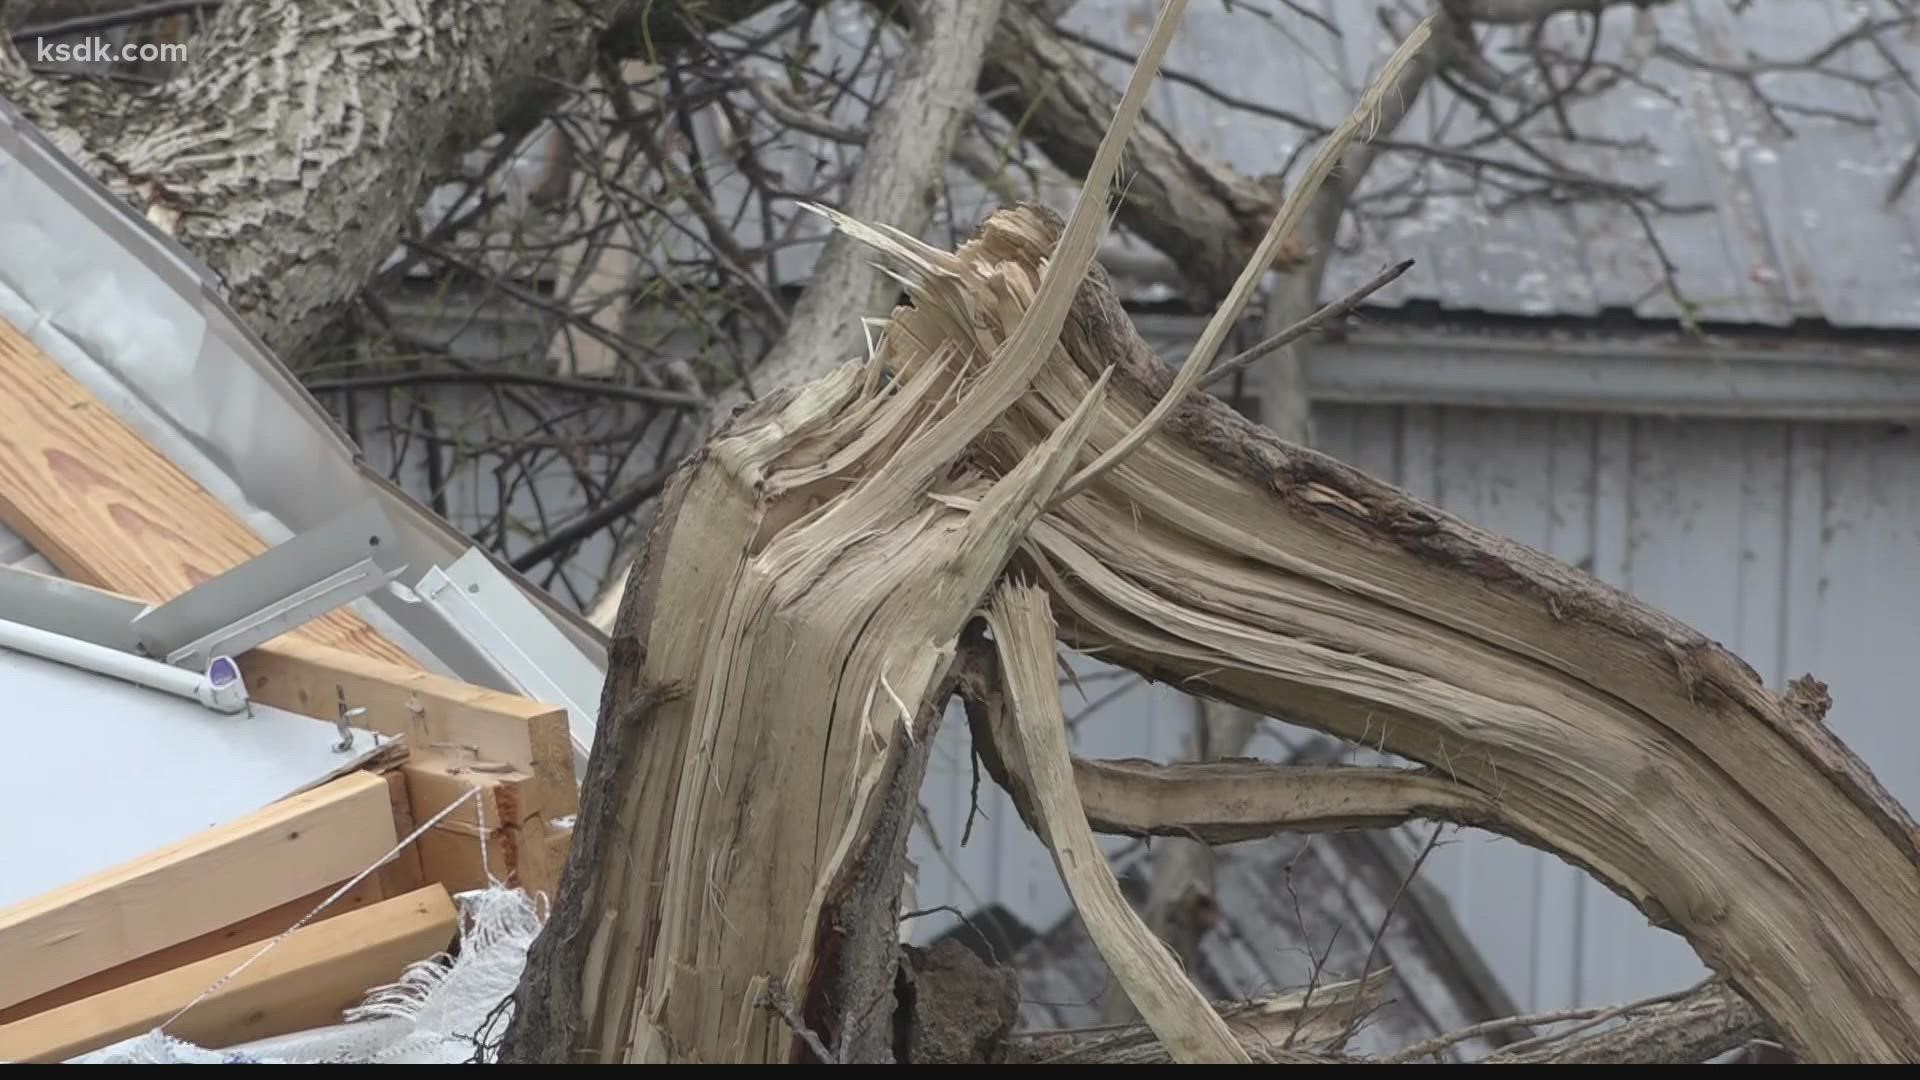 “I was just honestly surprised that my house was still standing,” said Schwartz.  “There’s just minor damage to it and everything else around me was just destroyed.”